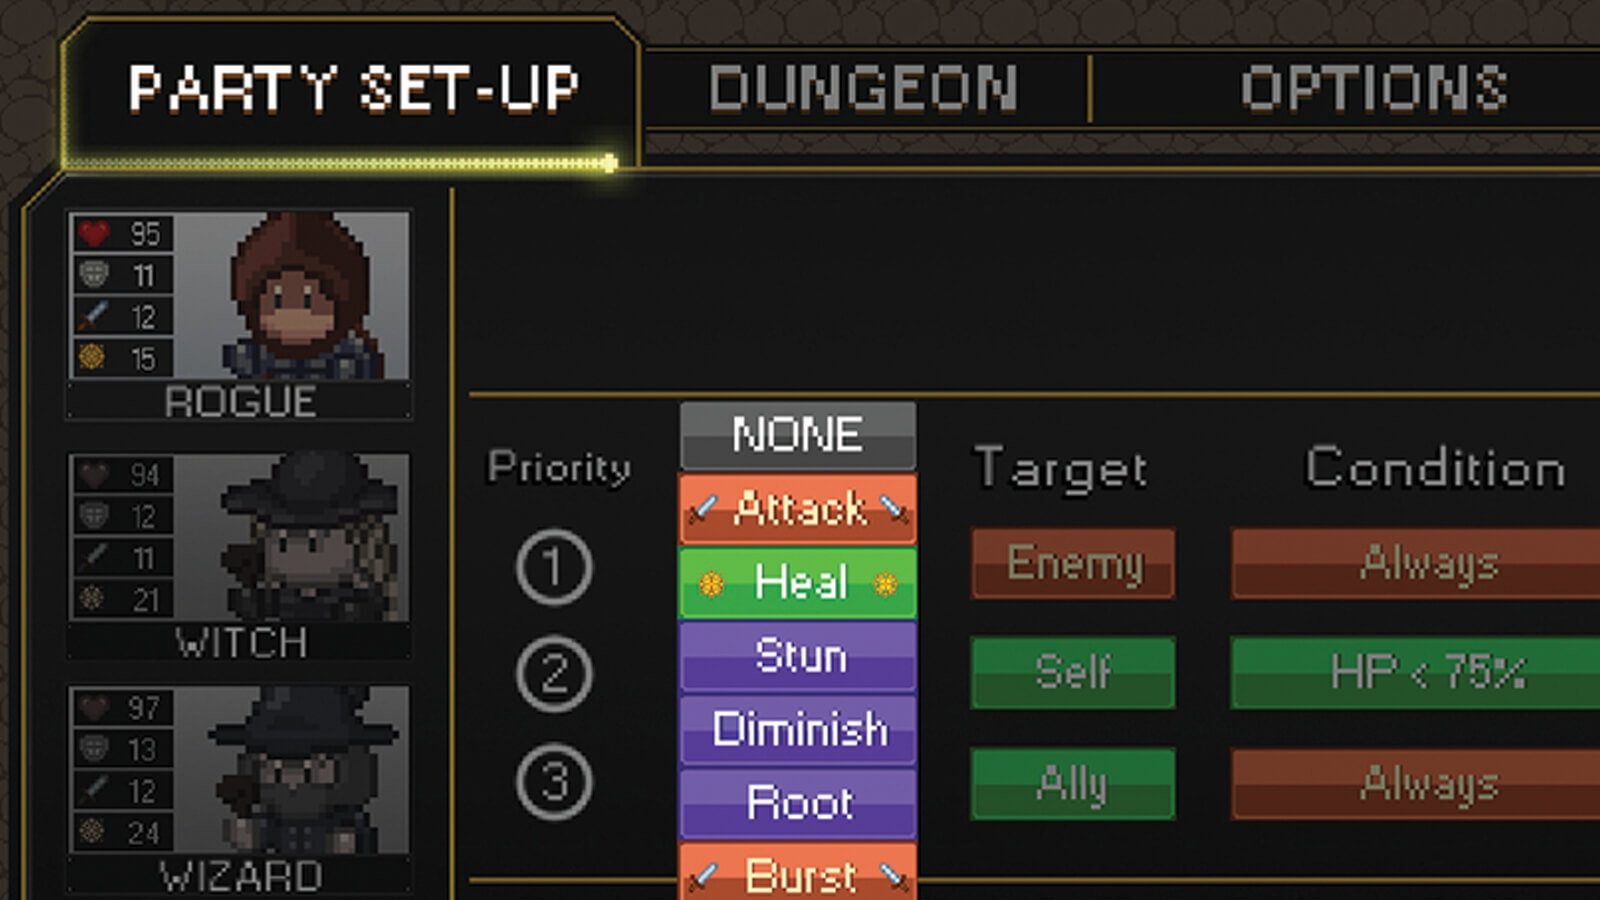 The party set-up screen indicating what actions the character will prioritize while in battle